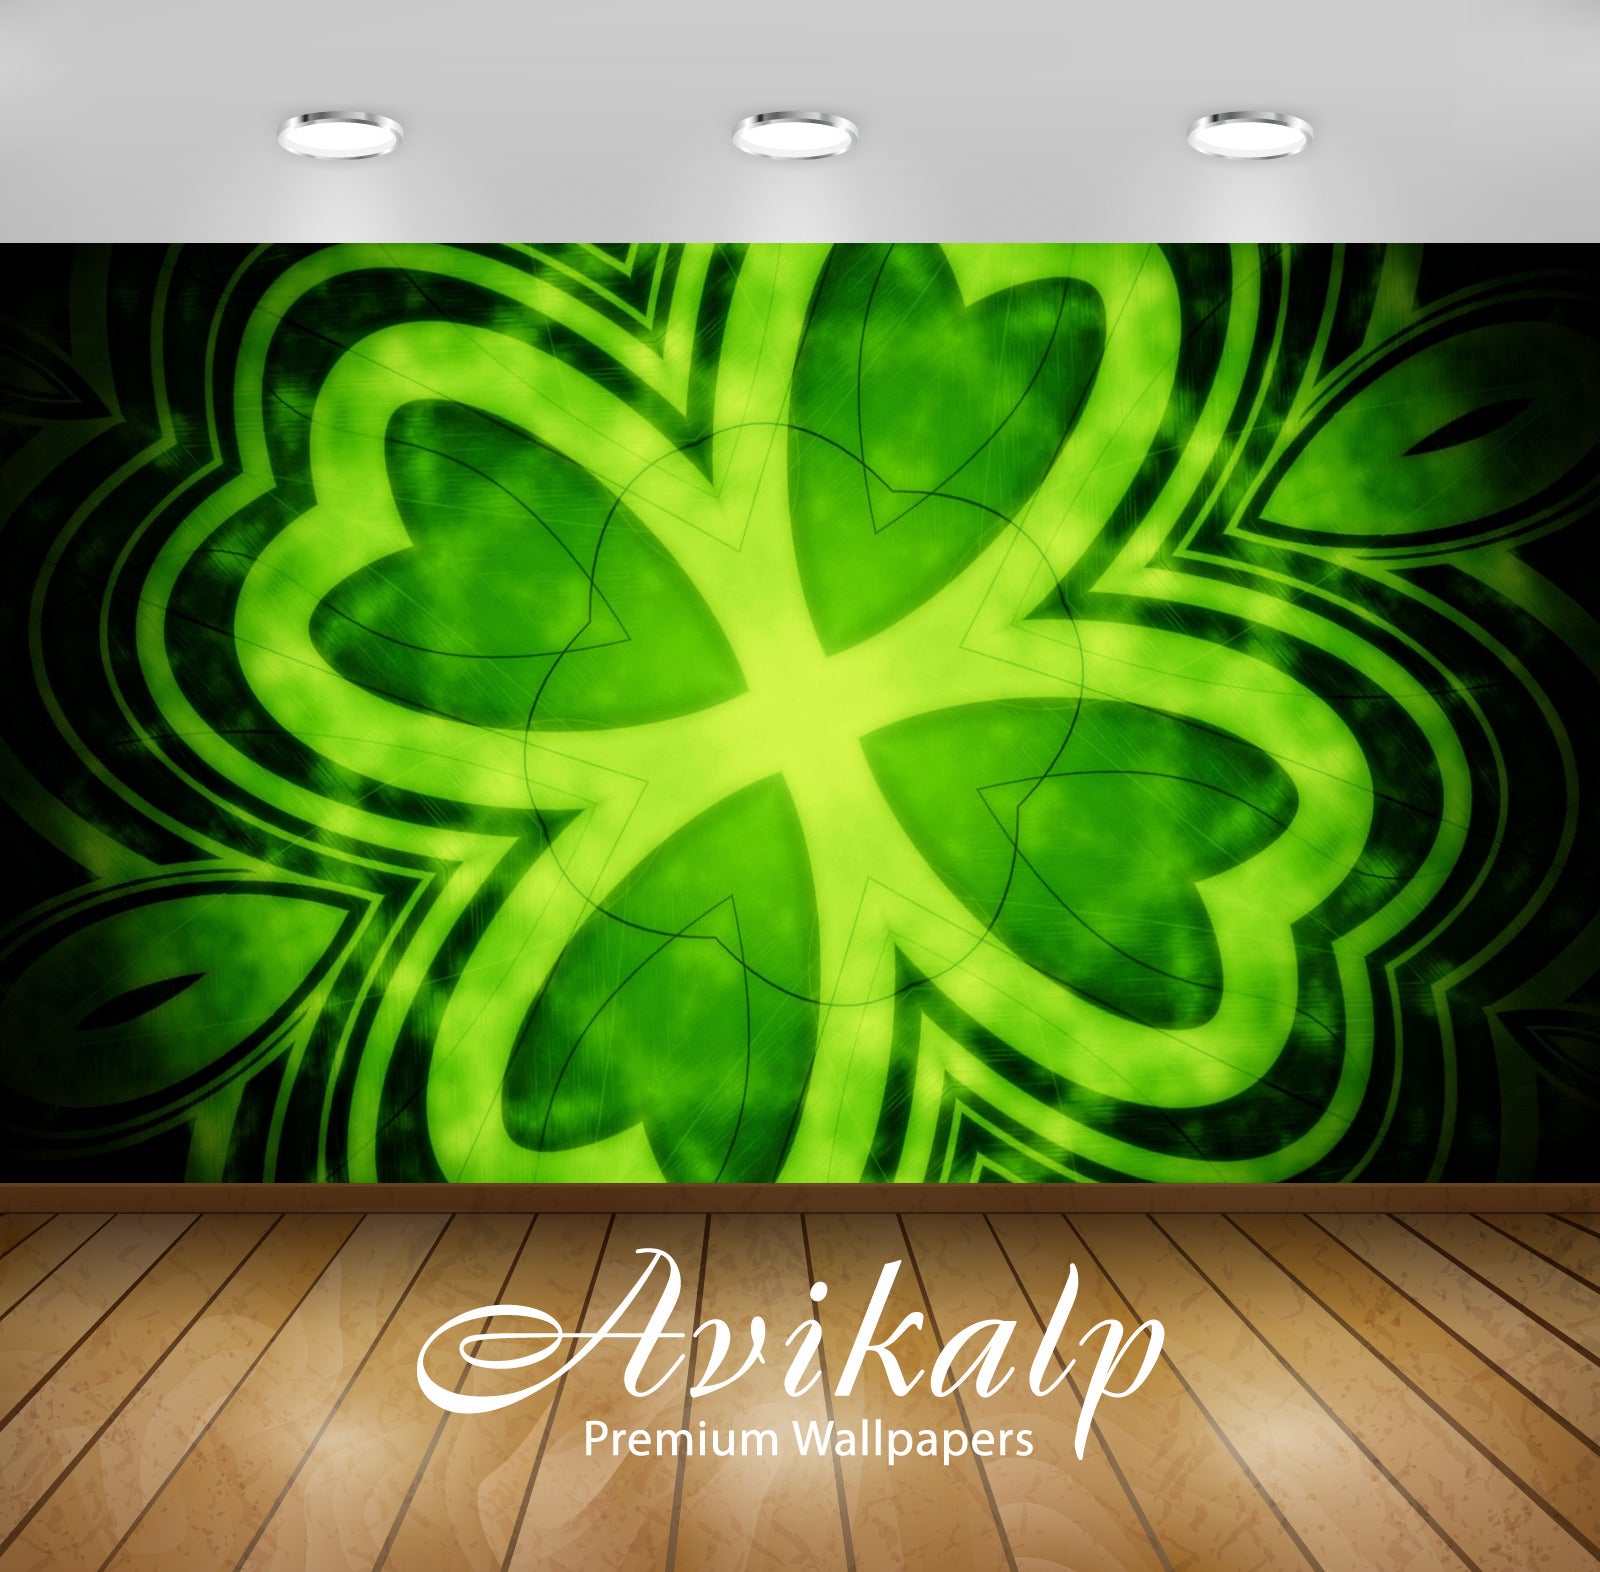 Avikalp Exclusive Awi4333 Four Leaf Clover Full HD Wallpapers for Living room, Hall, Kids Room, Kitc